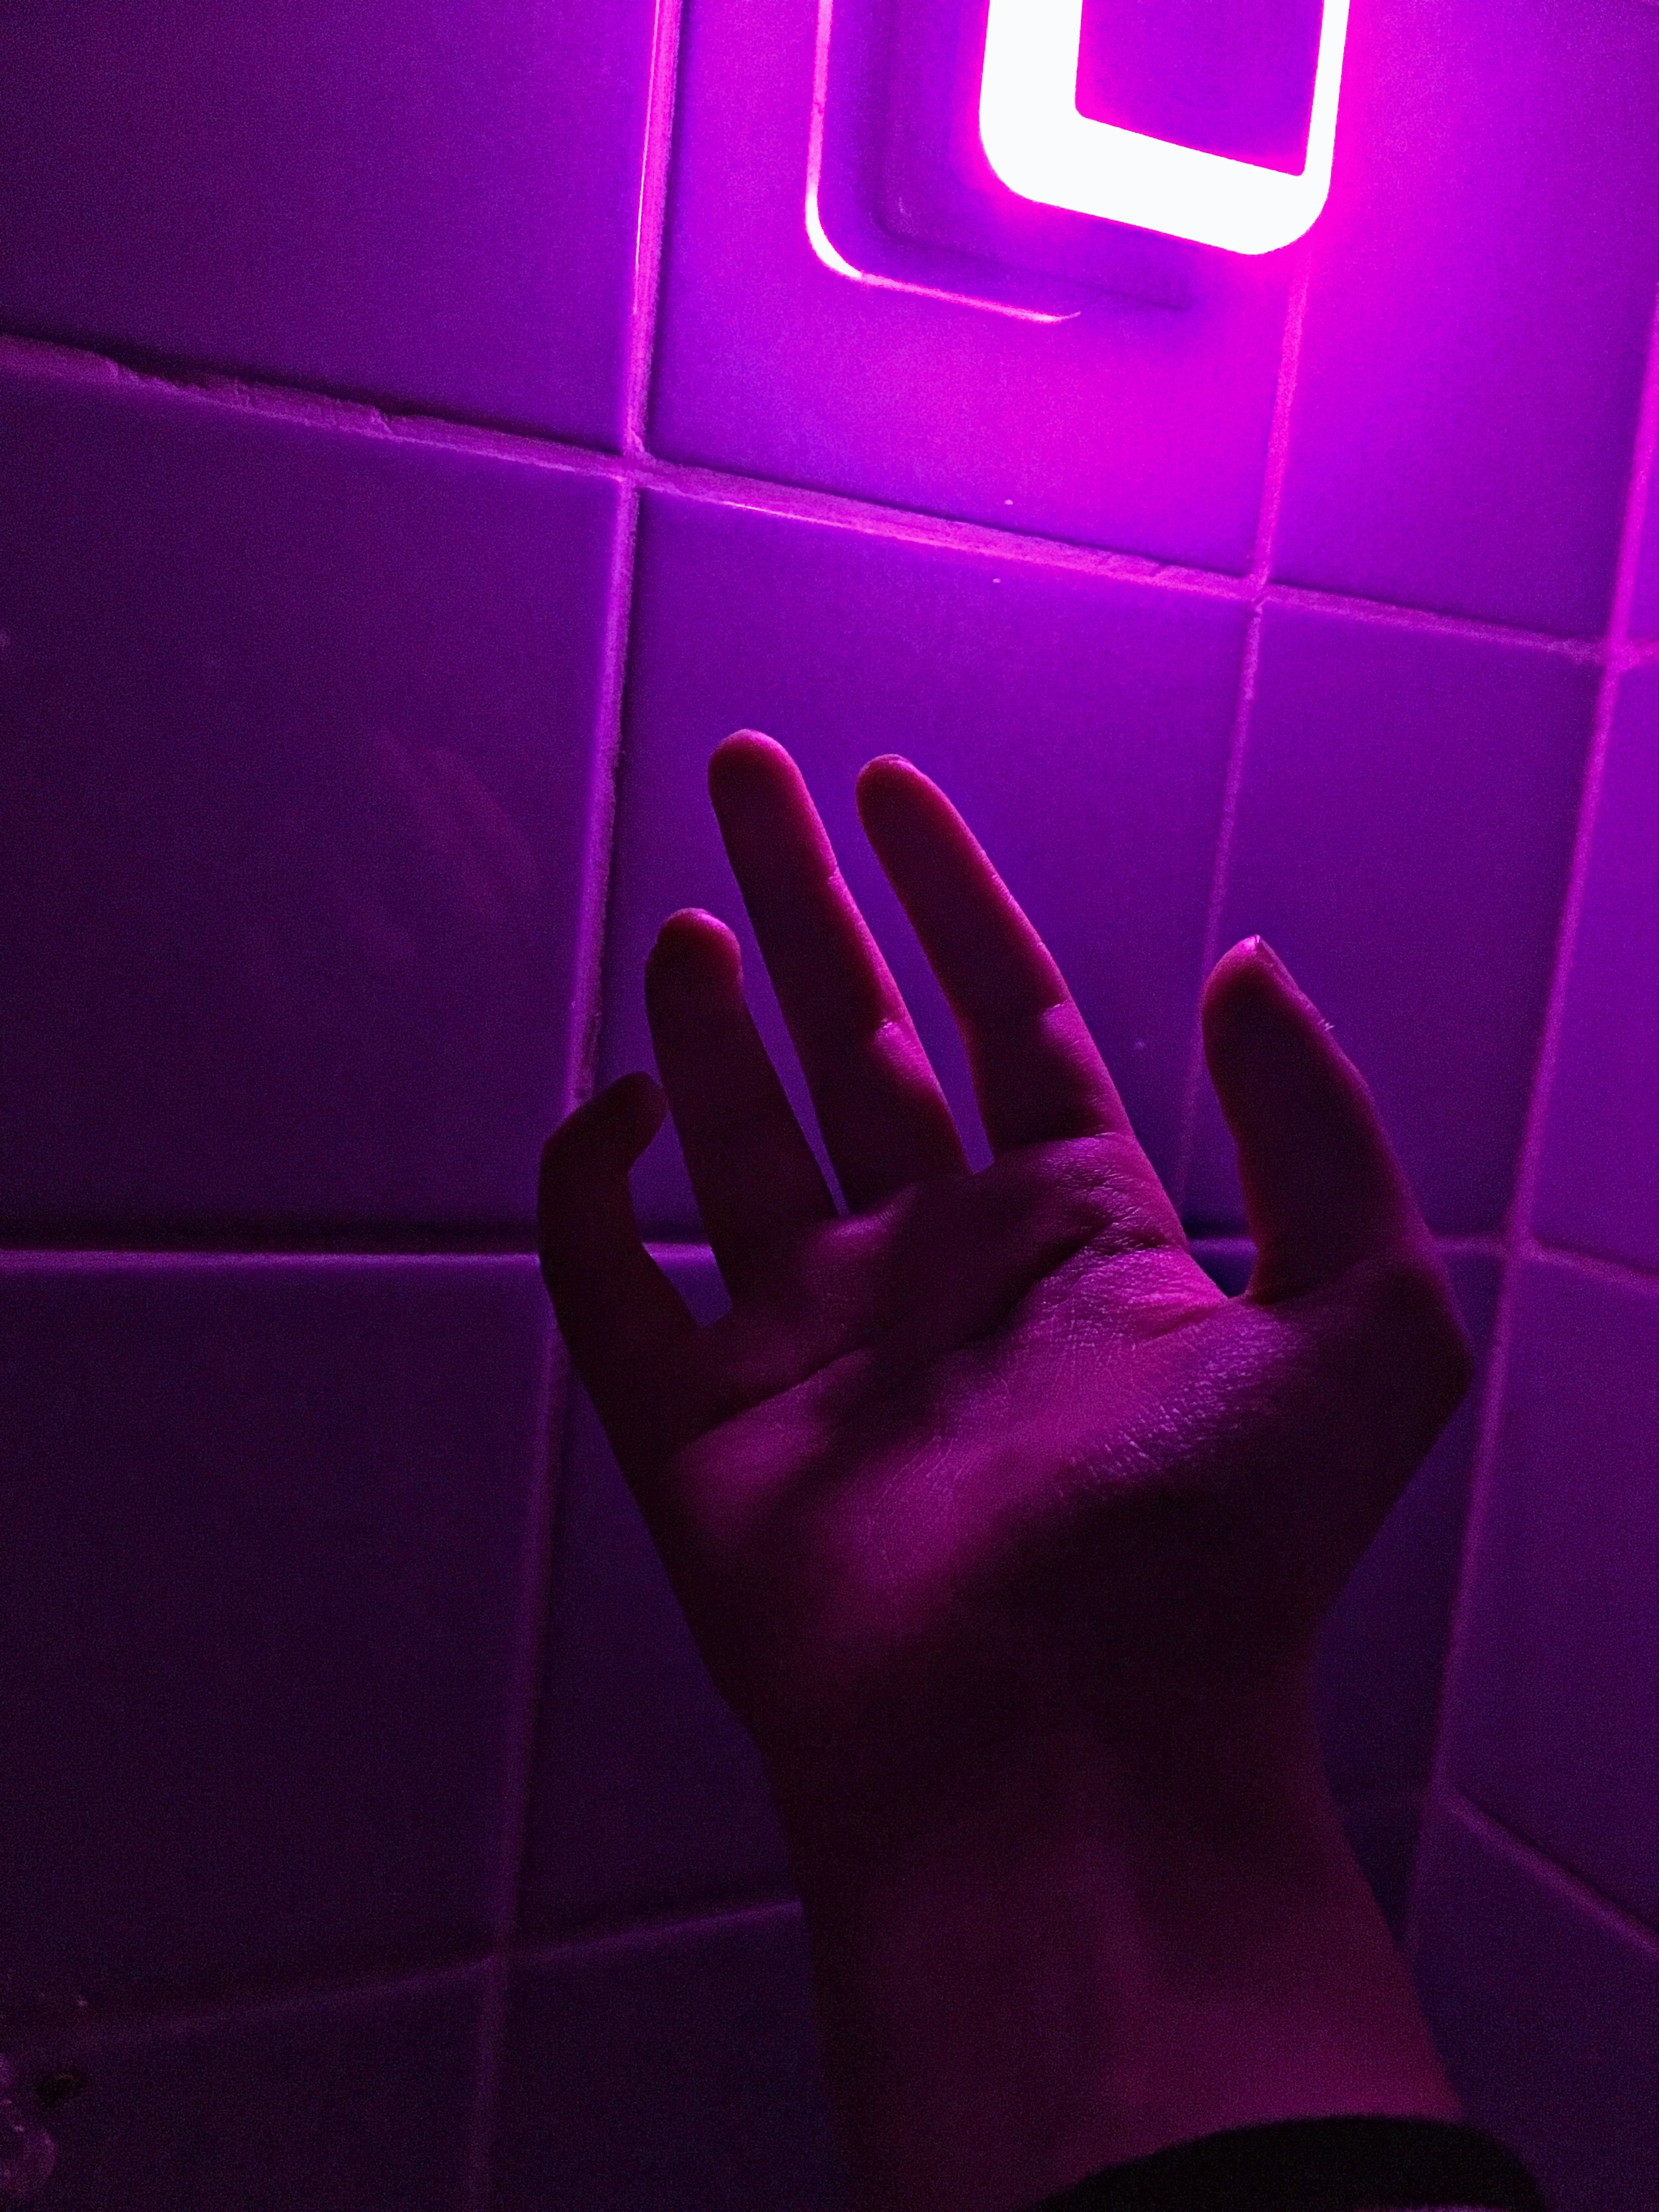 im in love  with this color aesthetic  purple hand bathr 